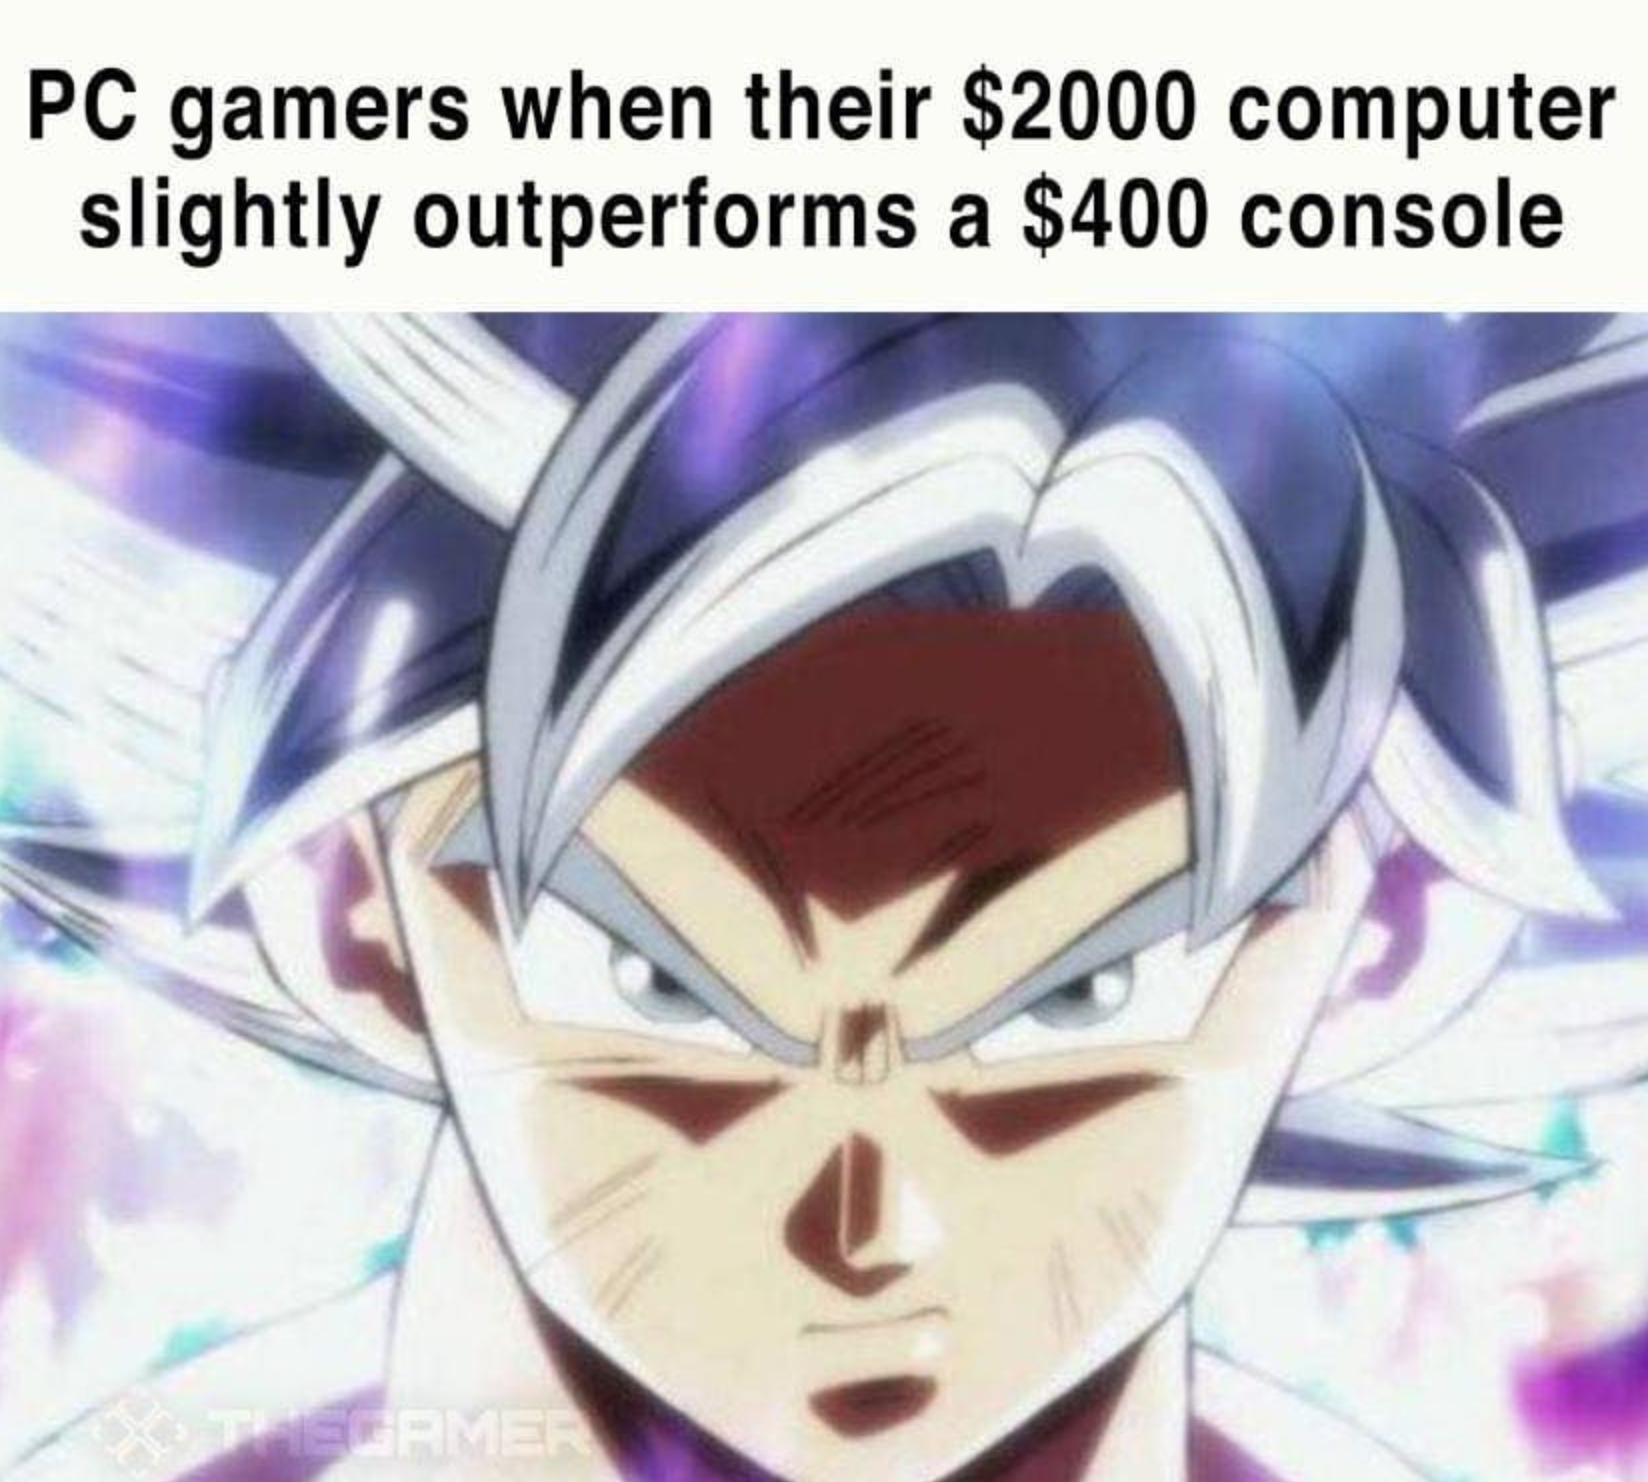 funny gaming memes - dragon ball super ultra instinct goku - Pc gamers when their $2000 computer slightly outperforms a $400 console Pusormer